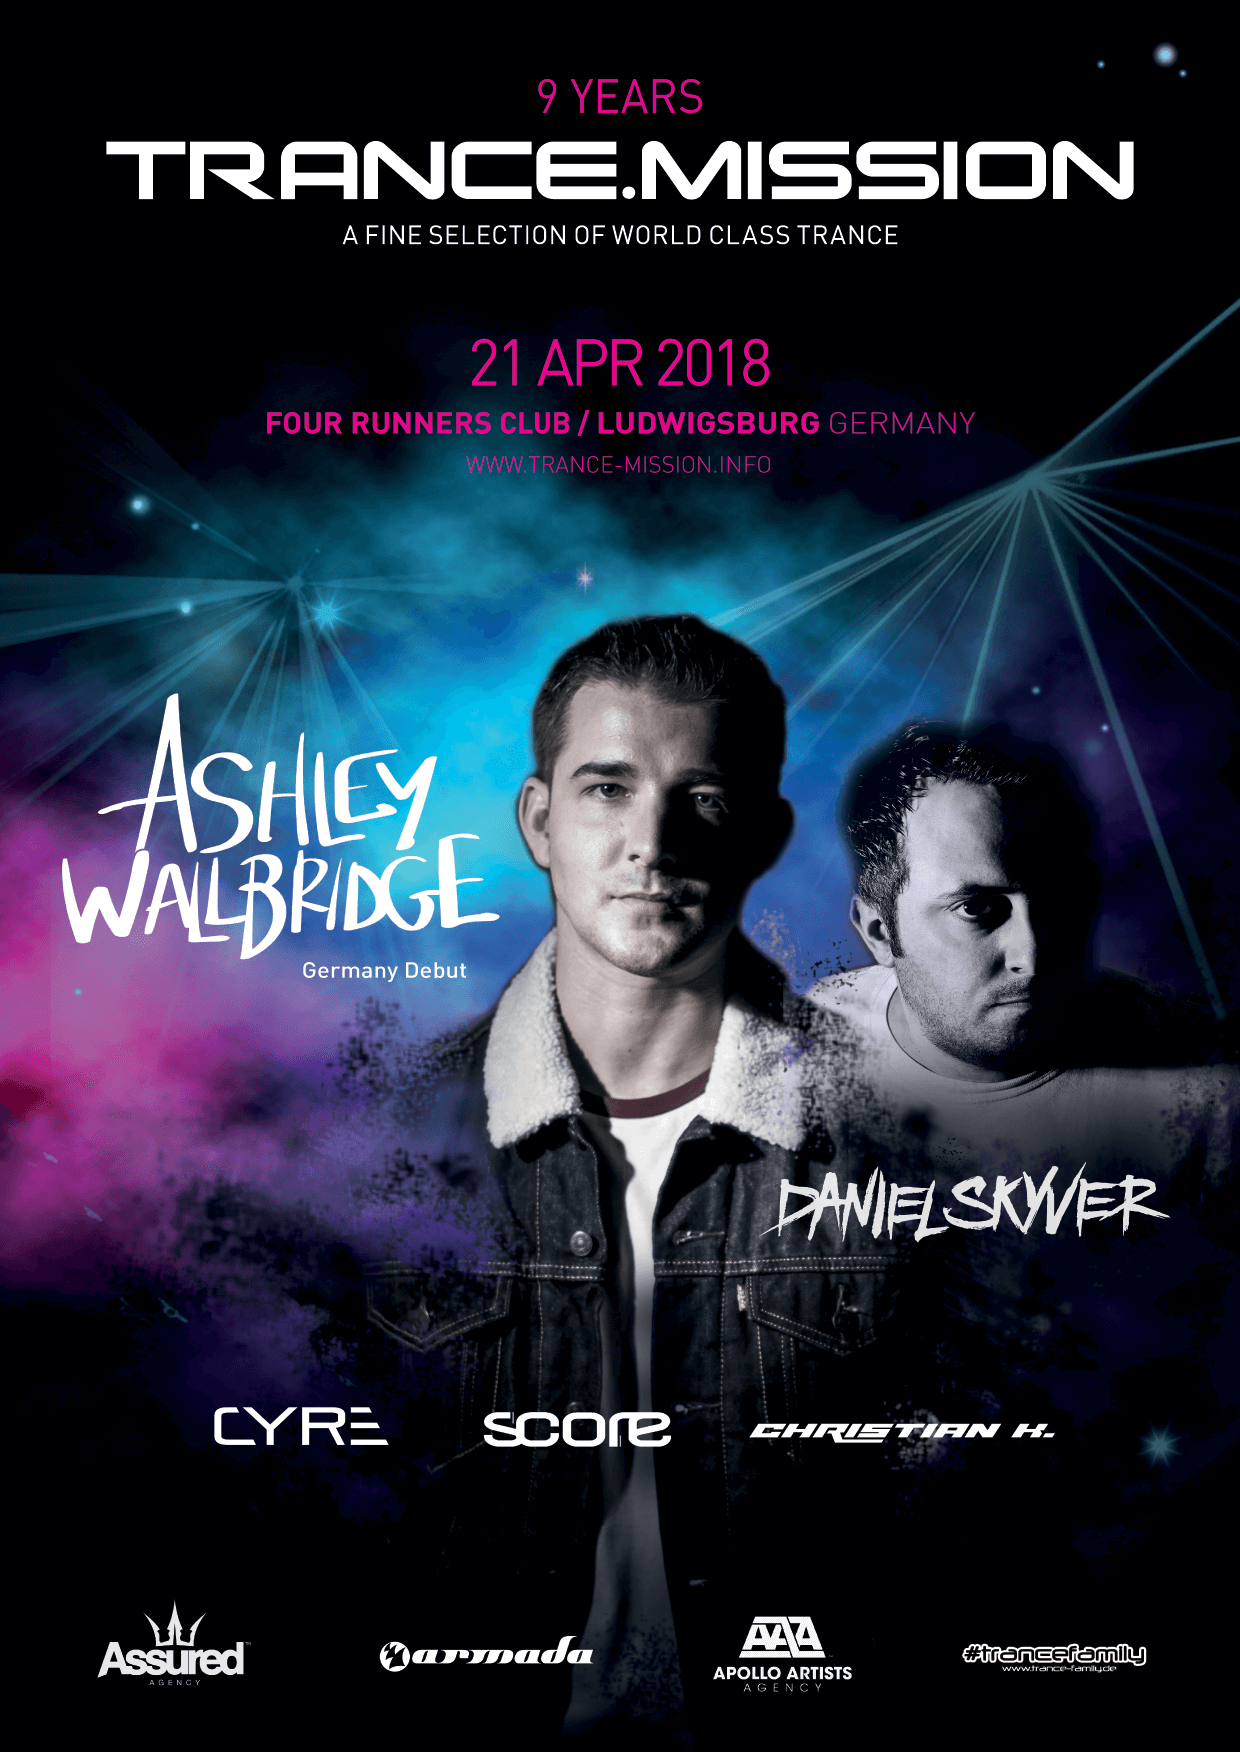 Trance.Mission presents Ashley Walbridge and Daniel Skyver at Four Runners Club, Ludwigsburg, Germany on 21st of April 2018